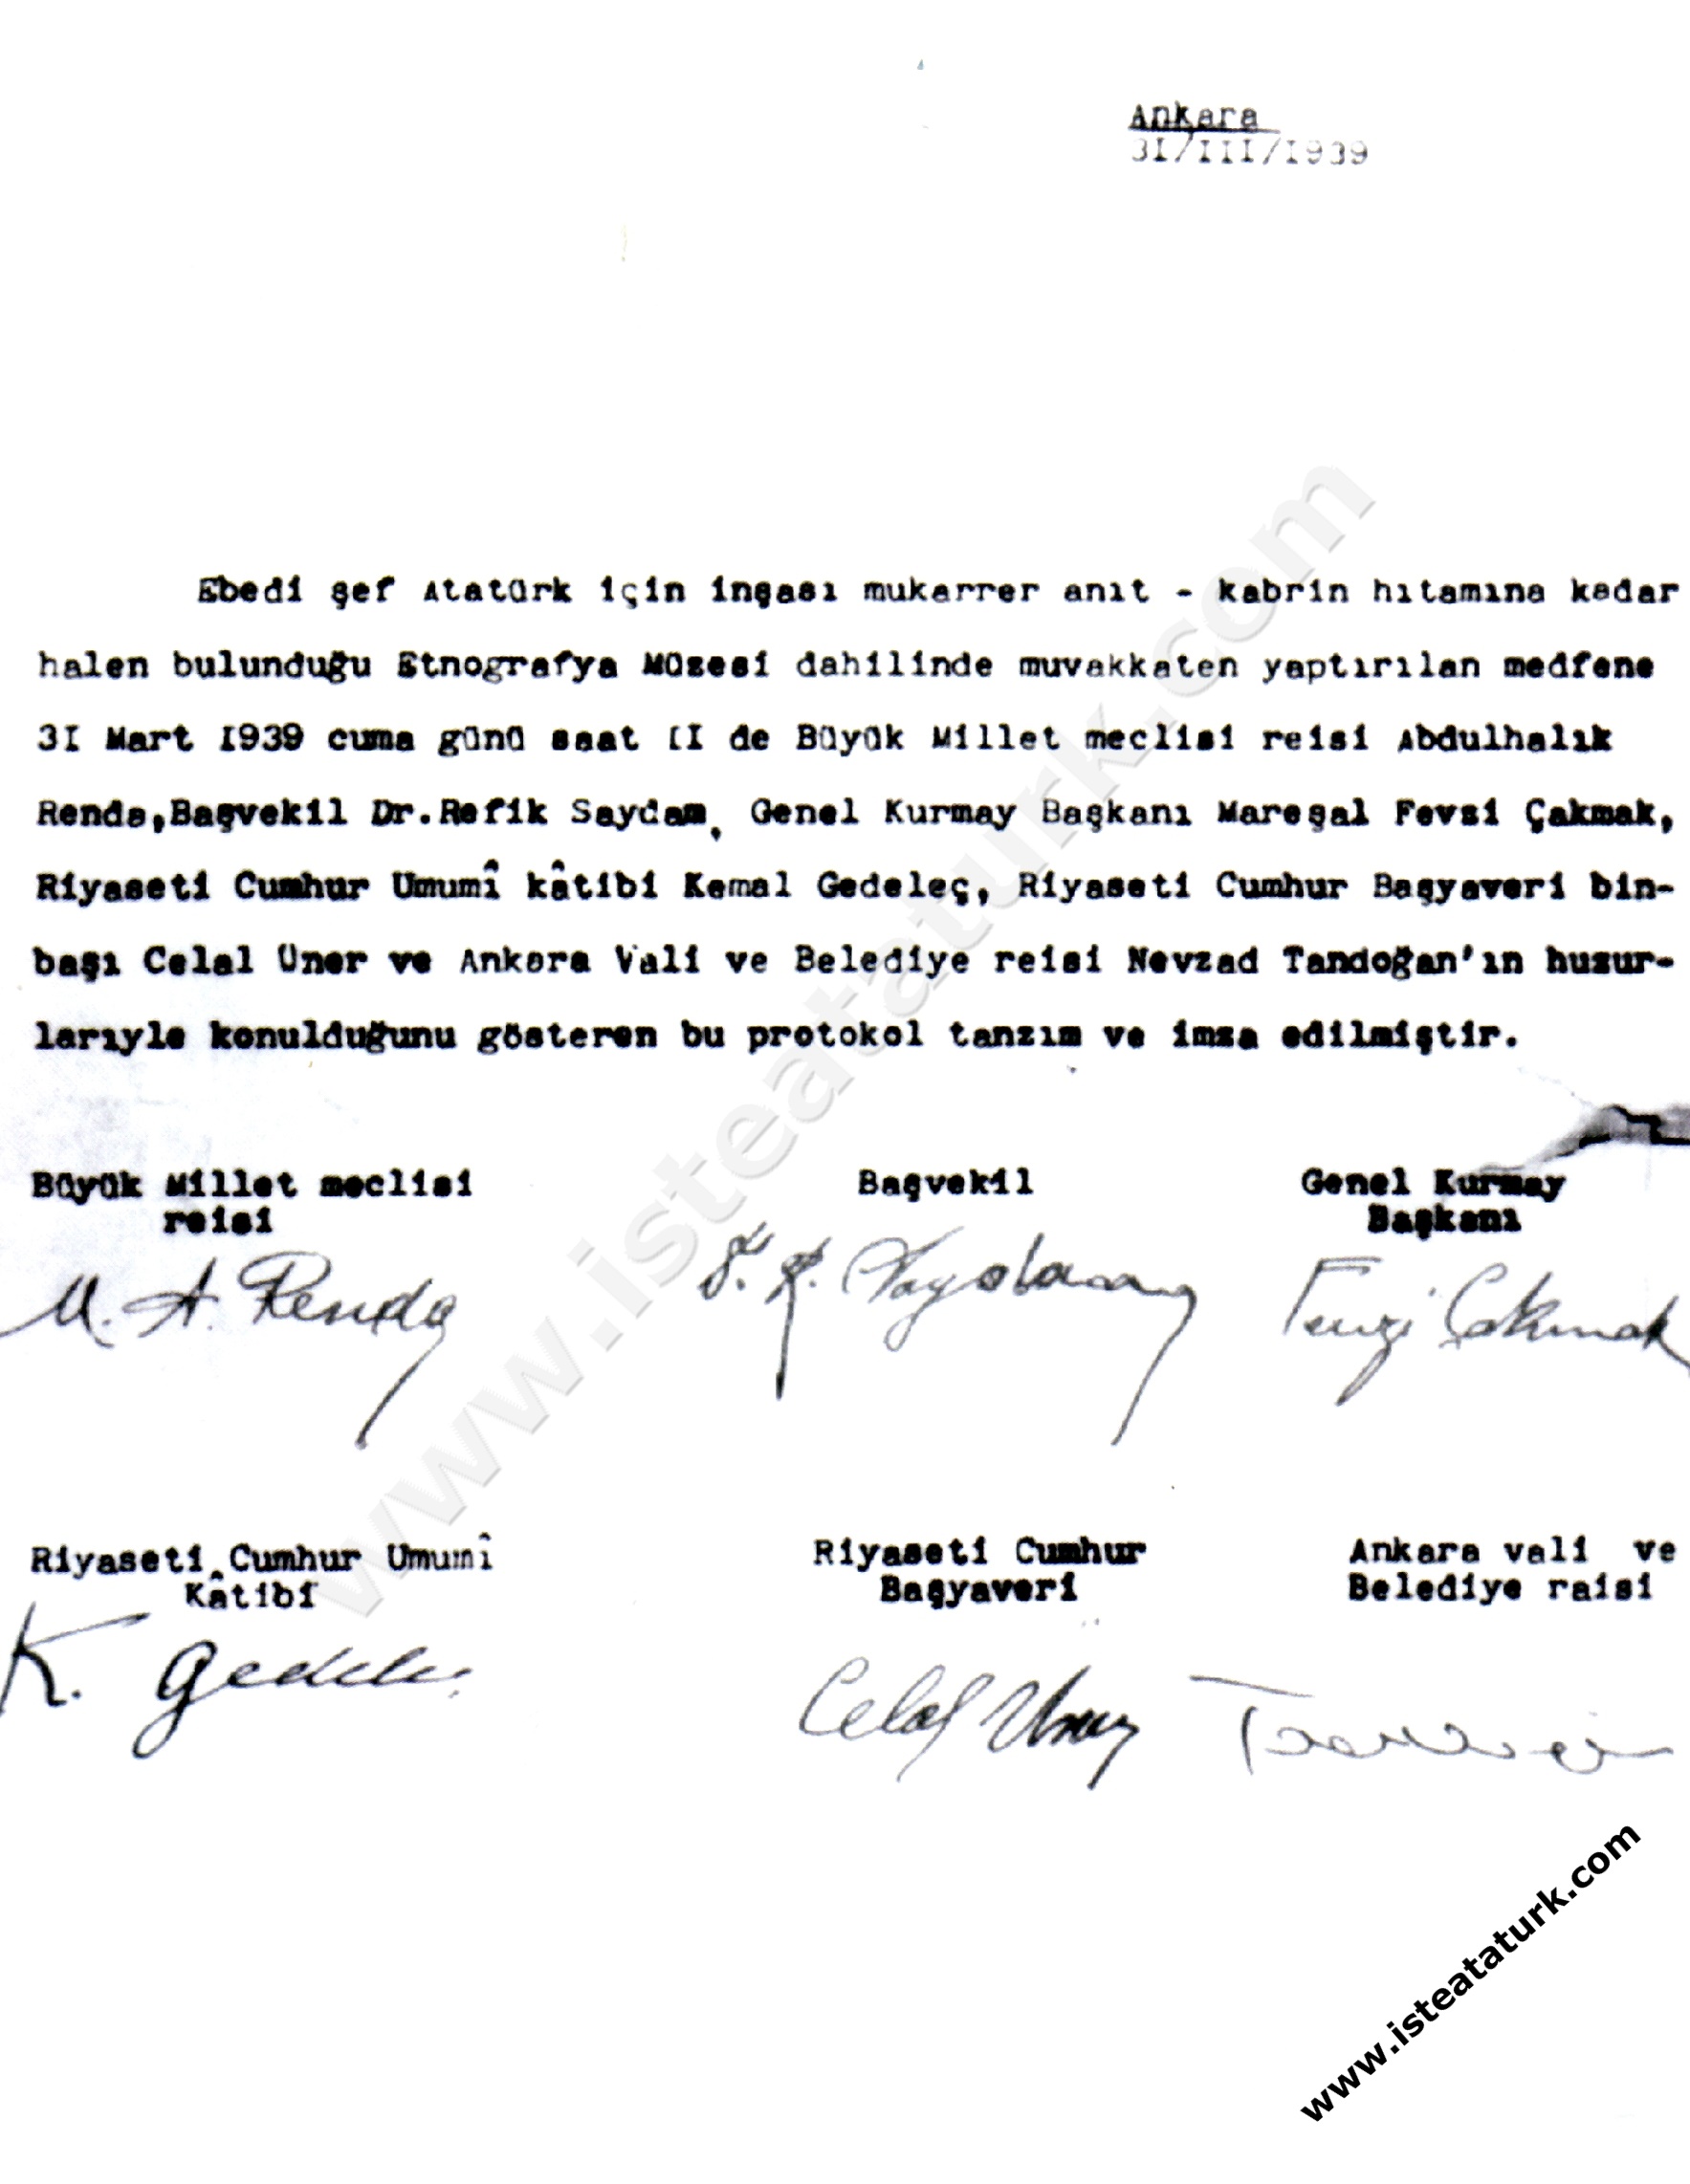 Protocol on the construction of Anıtkabir, dated March 31, 1939.